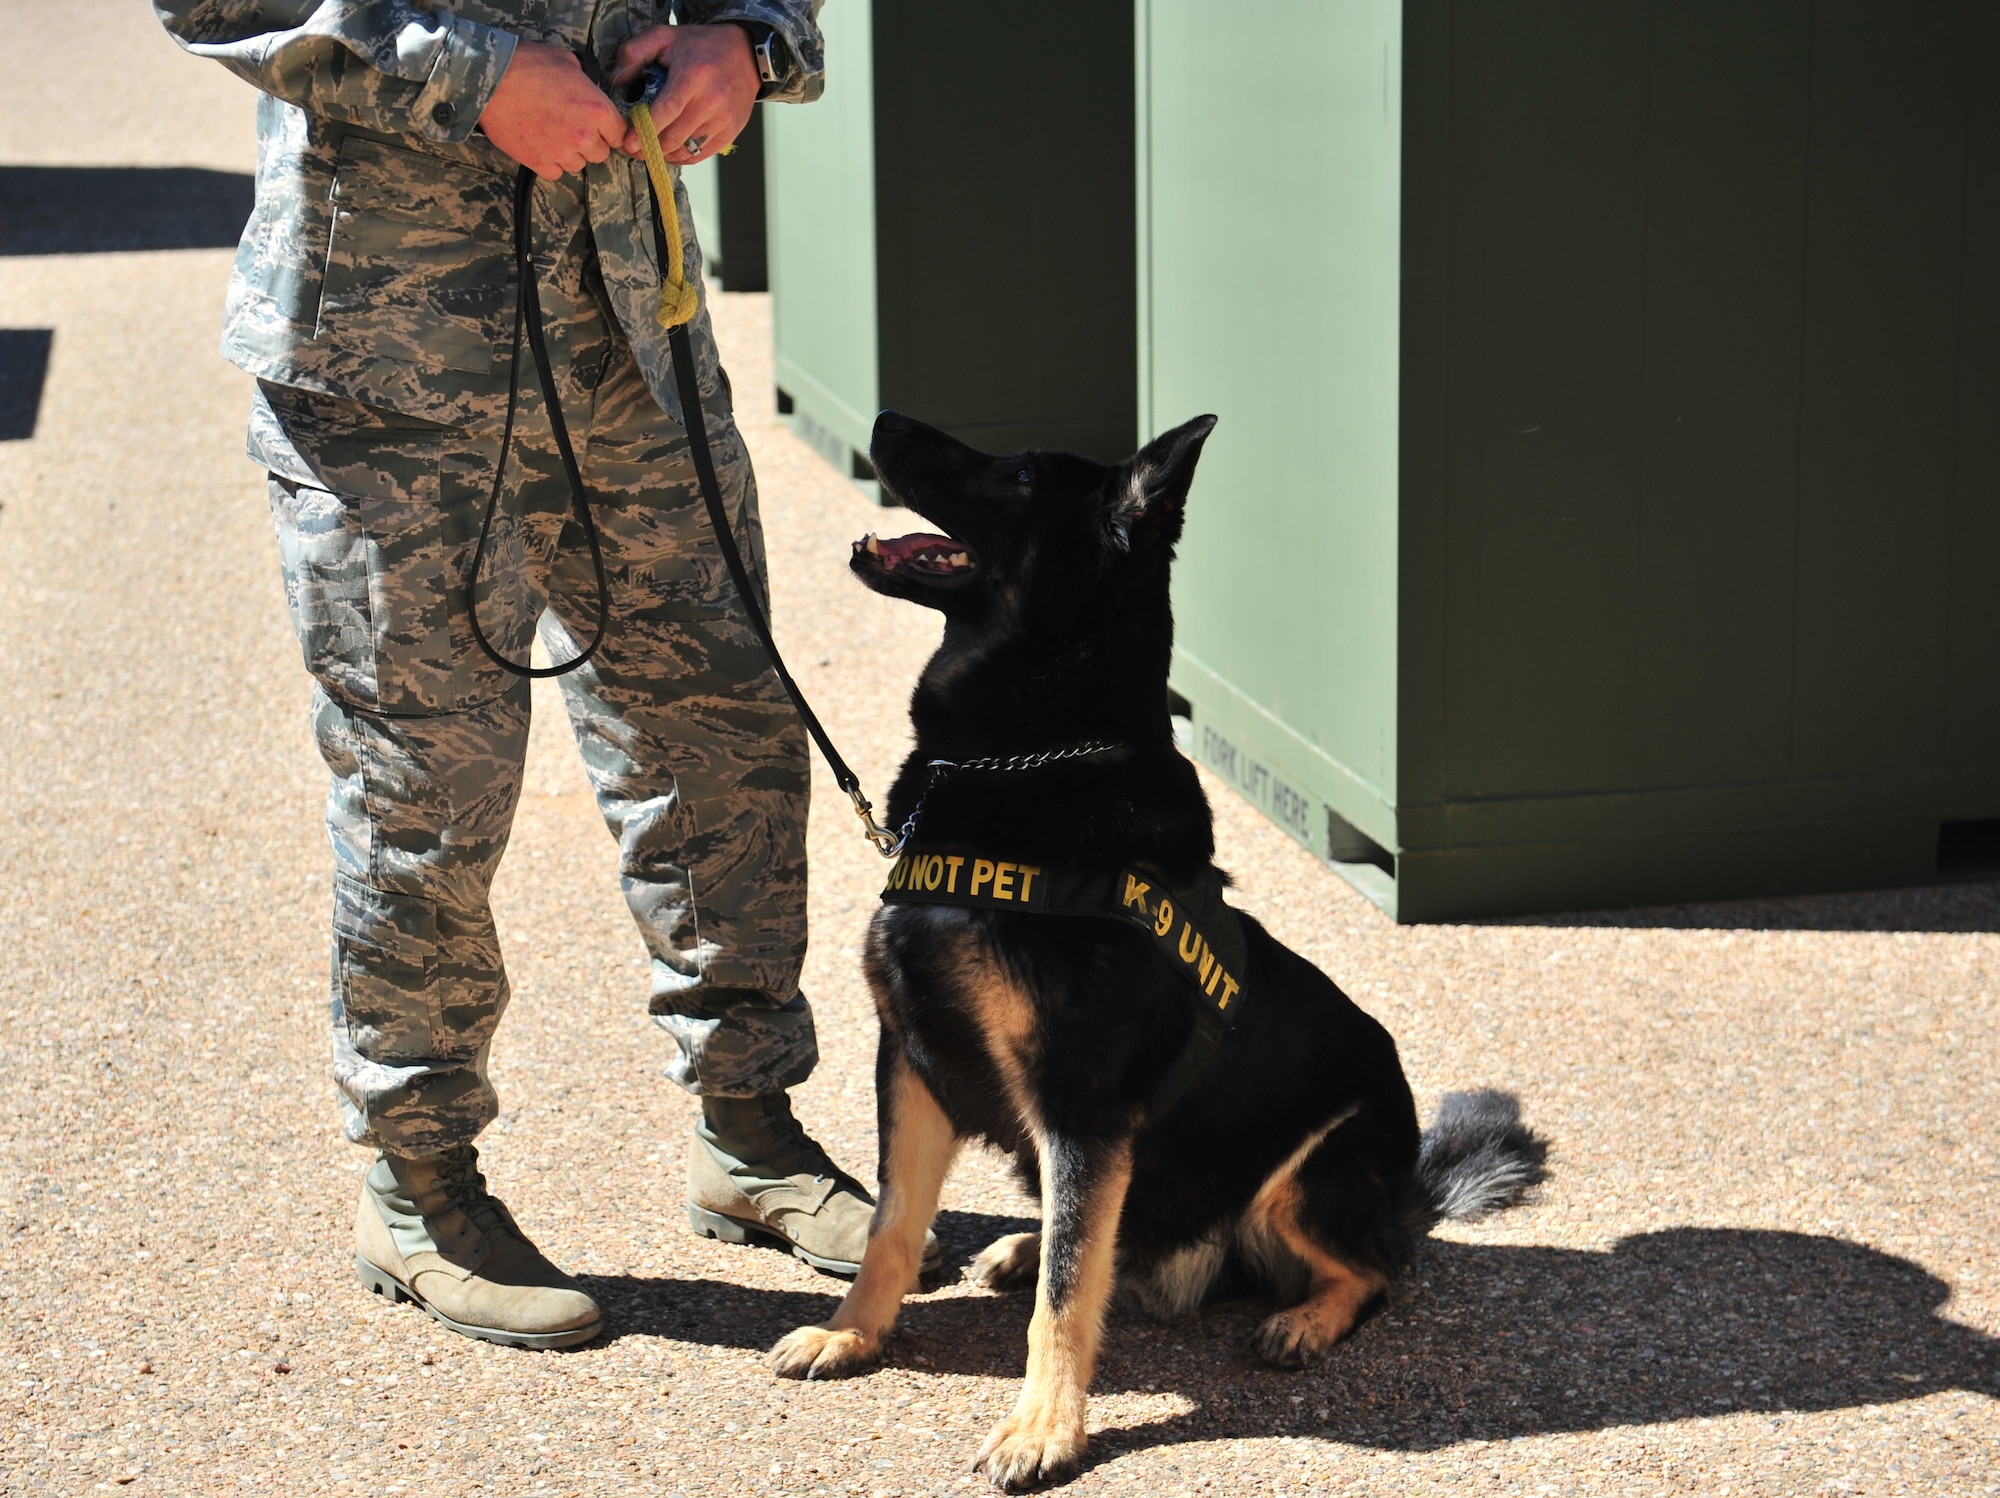 U.S. Air Force Staff Sgt. Adam Wylie, 27th Special Operations Security Forces Squadron military working dog handler, prepares to reward K-9 unit Dino K014 with a rubber Kong chew toy for locating a training aid at Cannon Air Force Base, N.M., March 15, 2012. Training aids can either be drugs or explosives based on what the dog?s certifications are. (U.S. Air Force photo by Airman 1st Class Alexxis Pons Abascal)